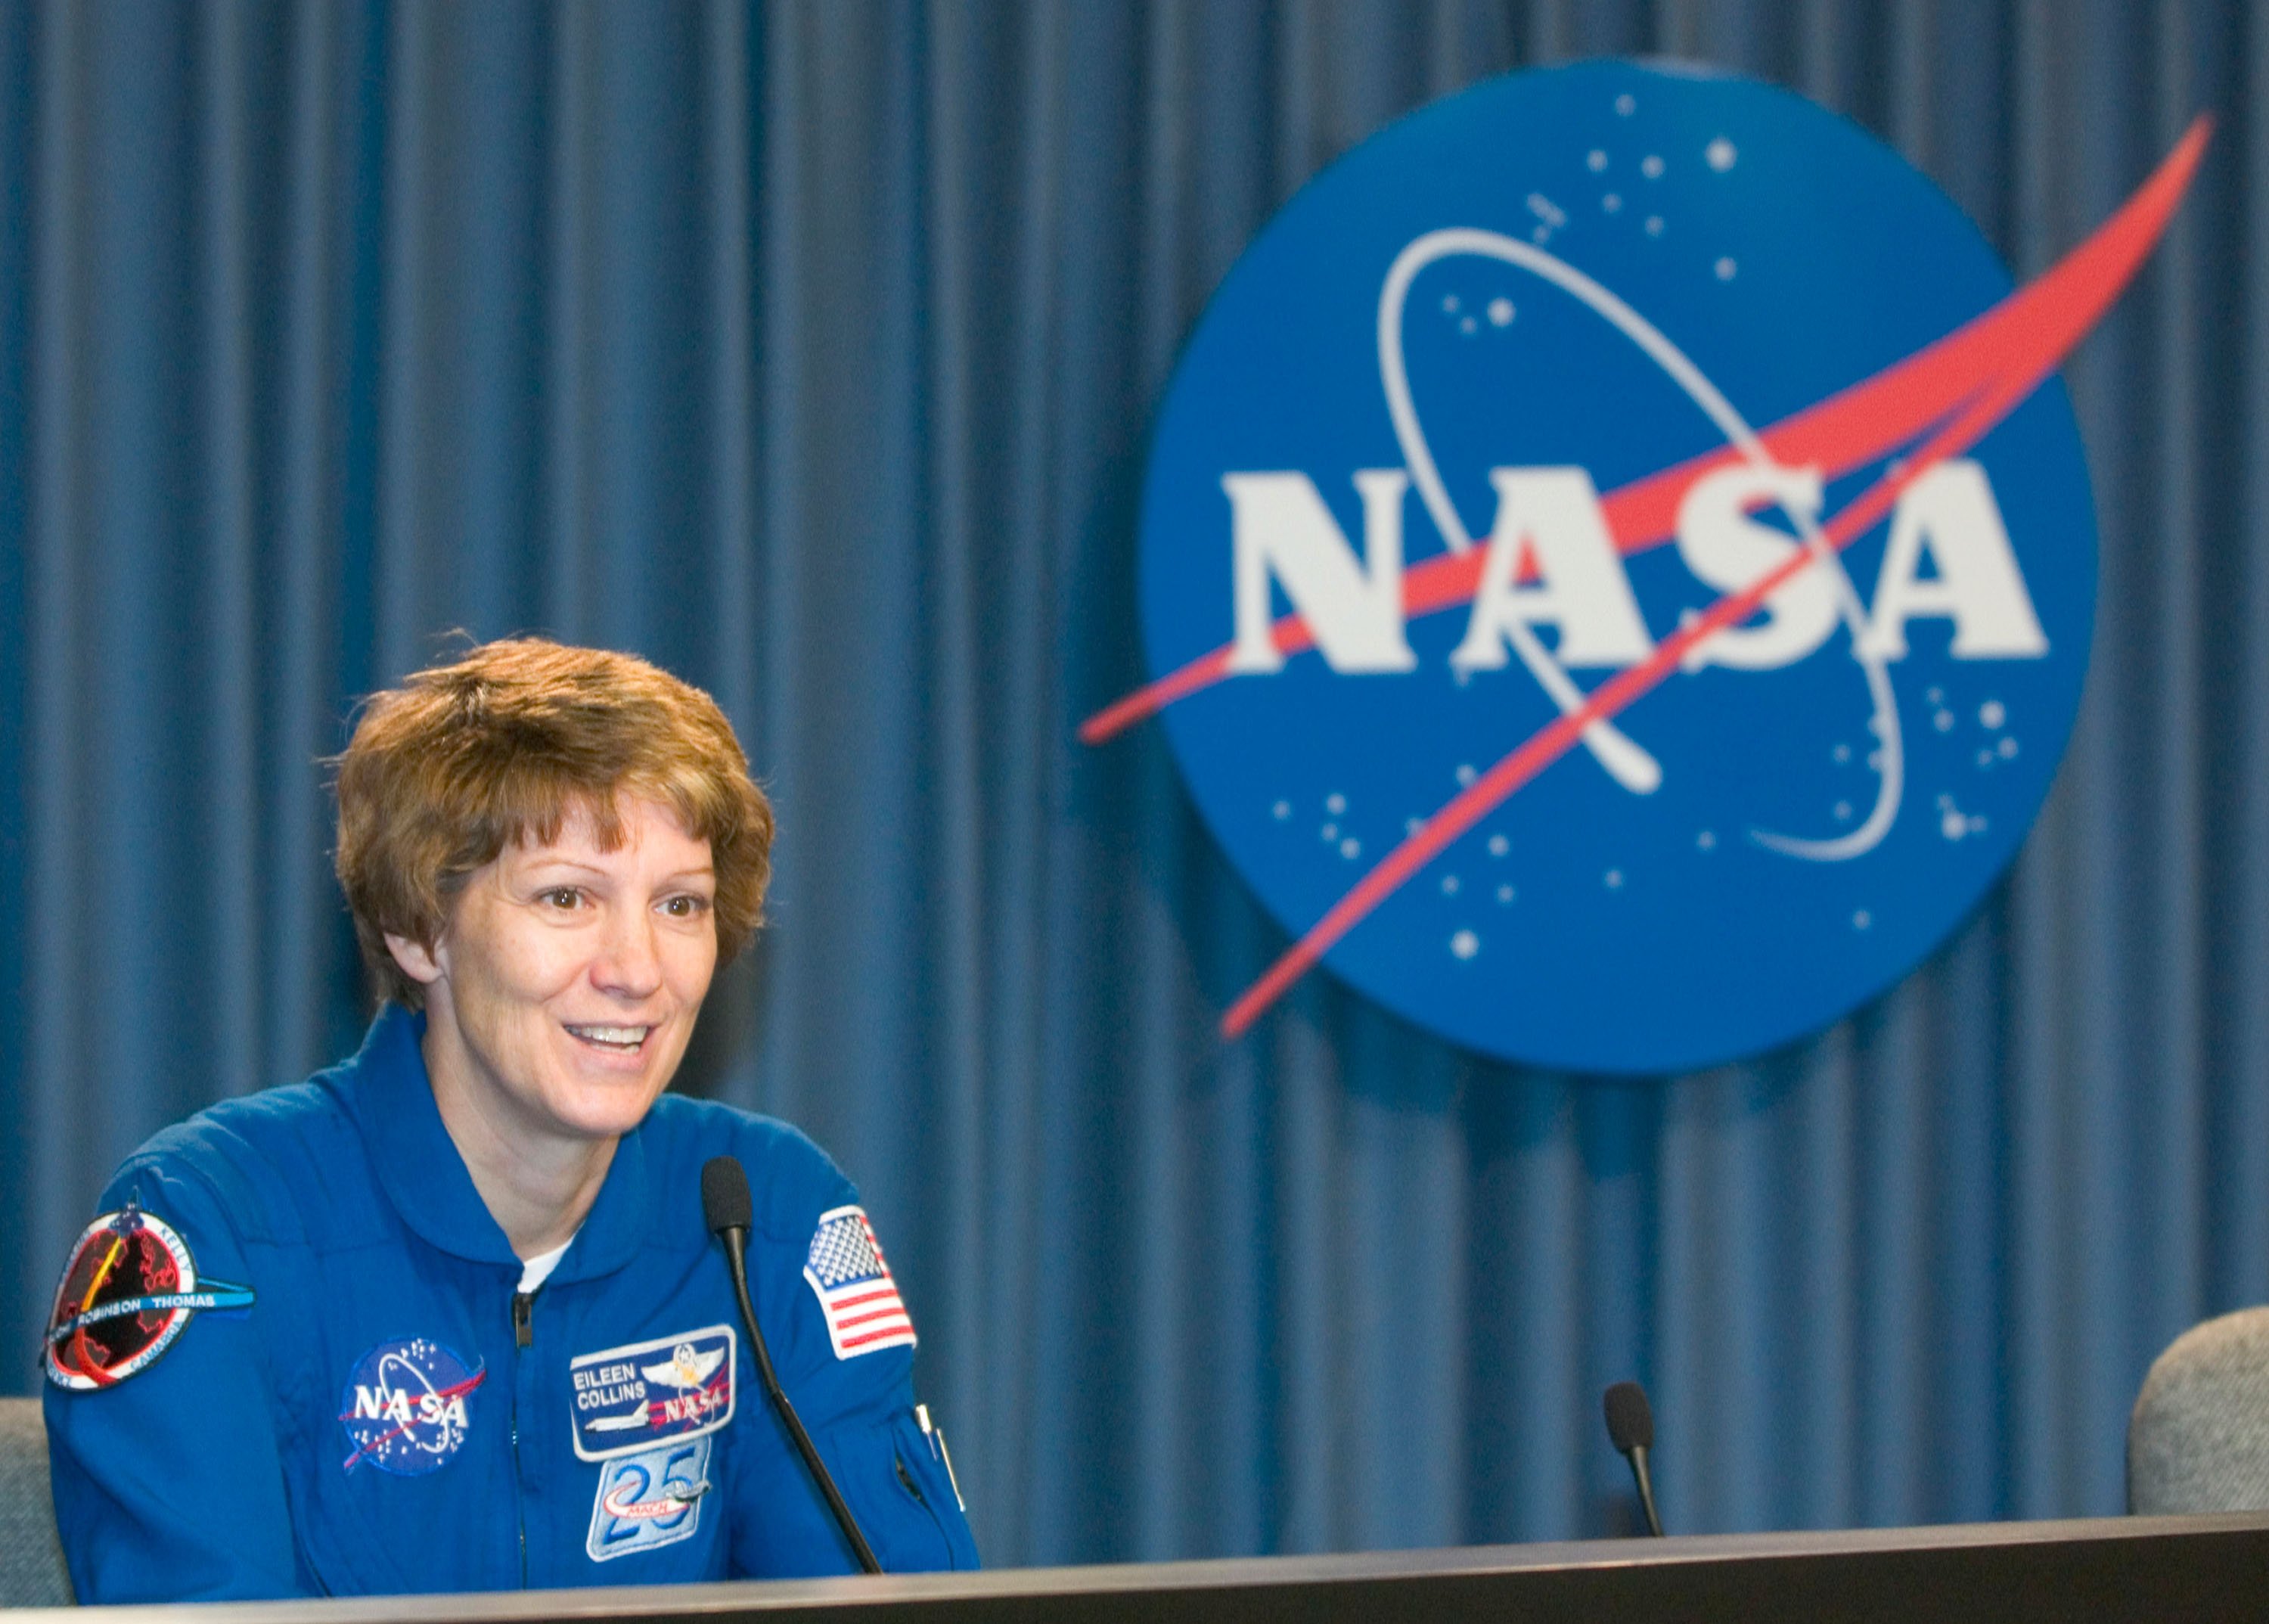 Space Shuttle Discovery commander Eileen Collins of Elmira, New York, addresses the news media after completing the Terminal Countdown Demonstration Test at Kennedy Space Center May 4, 2005 in Cape Canaveral, Florida. (Photo by Matt Stroshane/Getty Images)